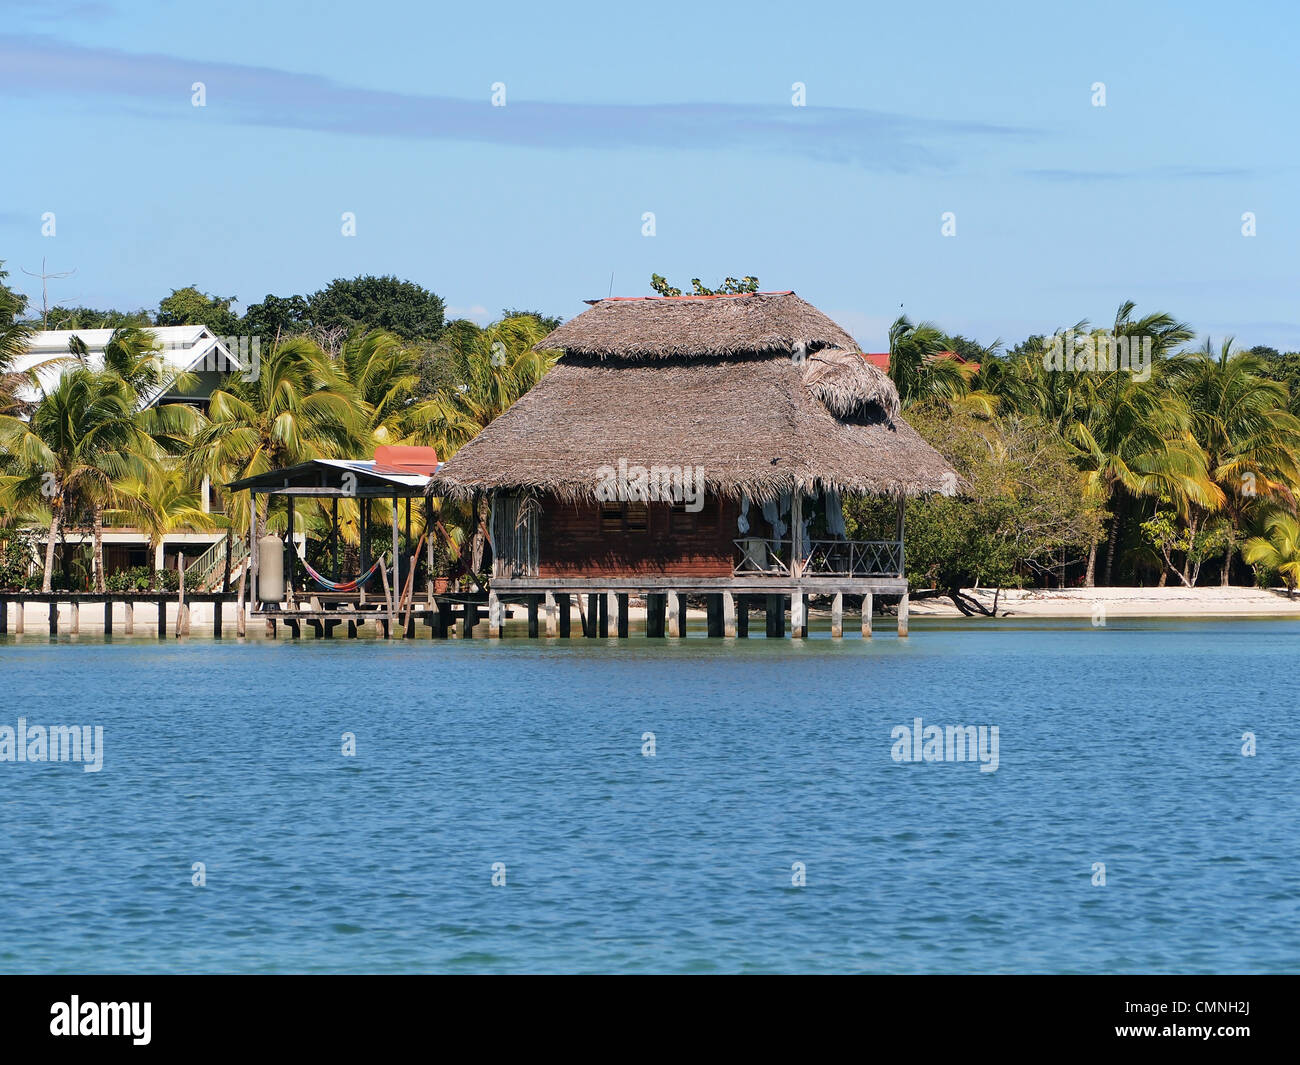 Bungalow on stilts with thatched roof over water and tropical beach in background, Bastimentos island, Caribbean side of Panama, Central America Stock Photo